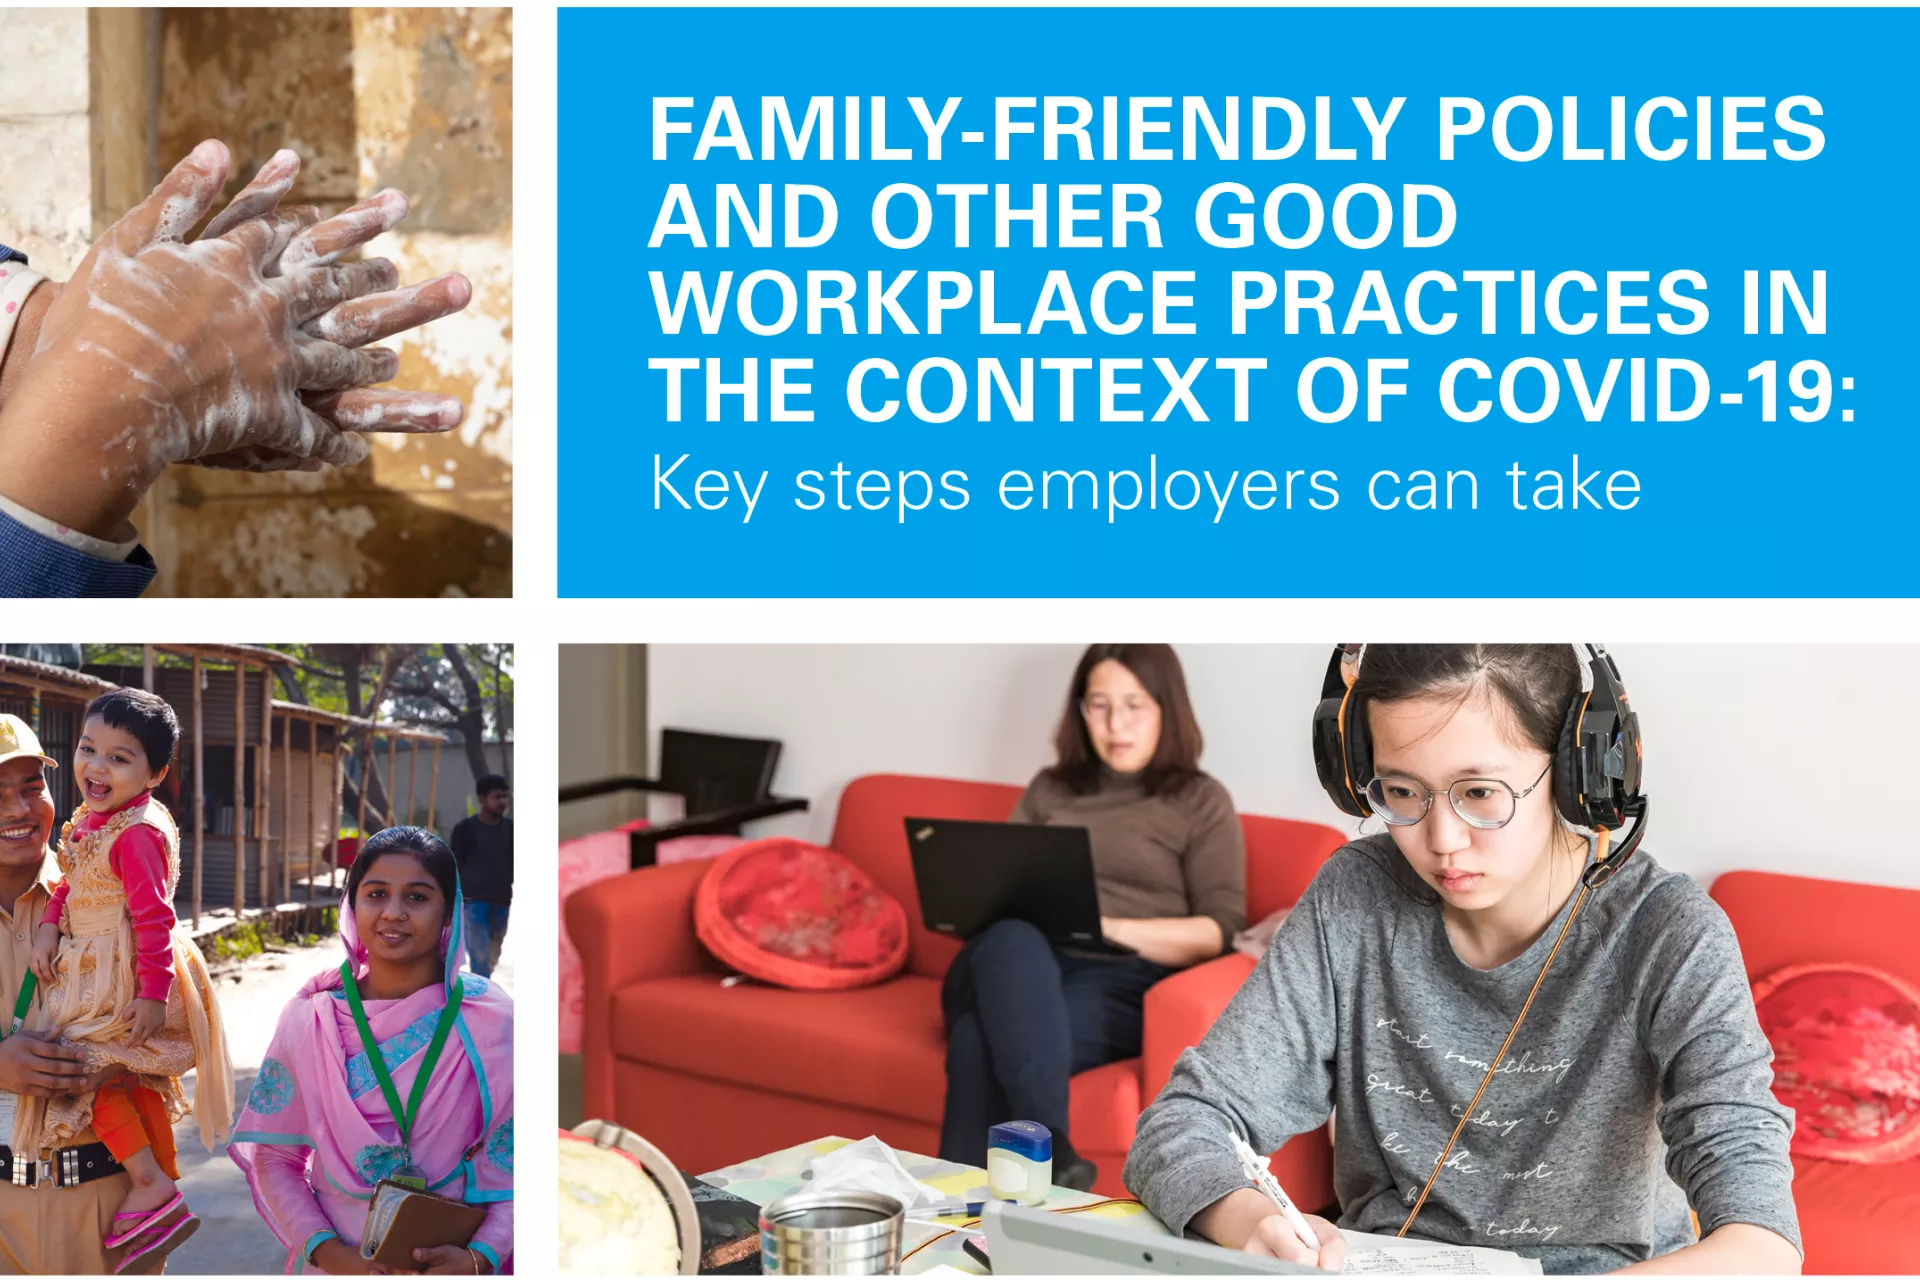 FAMILY-FRIENDLY POLICIES AND OTHER GOOD WORKPLACE PRACTICES IN THE CONTEXT OF COVID-19